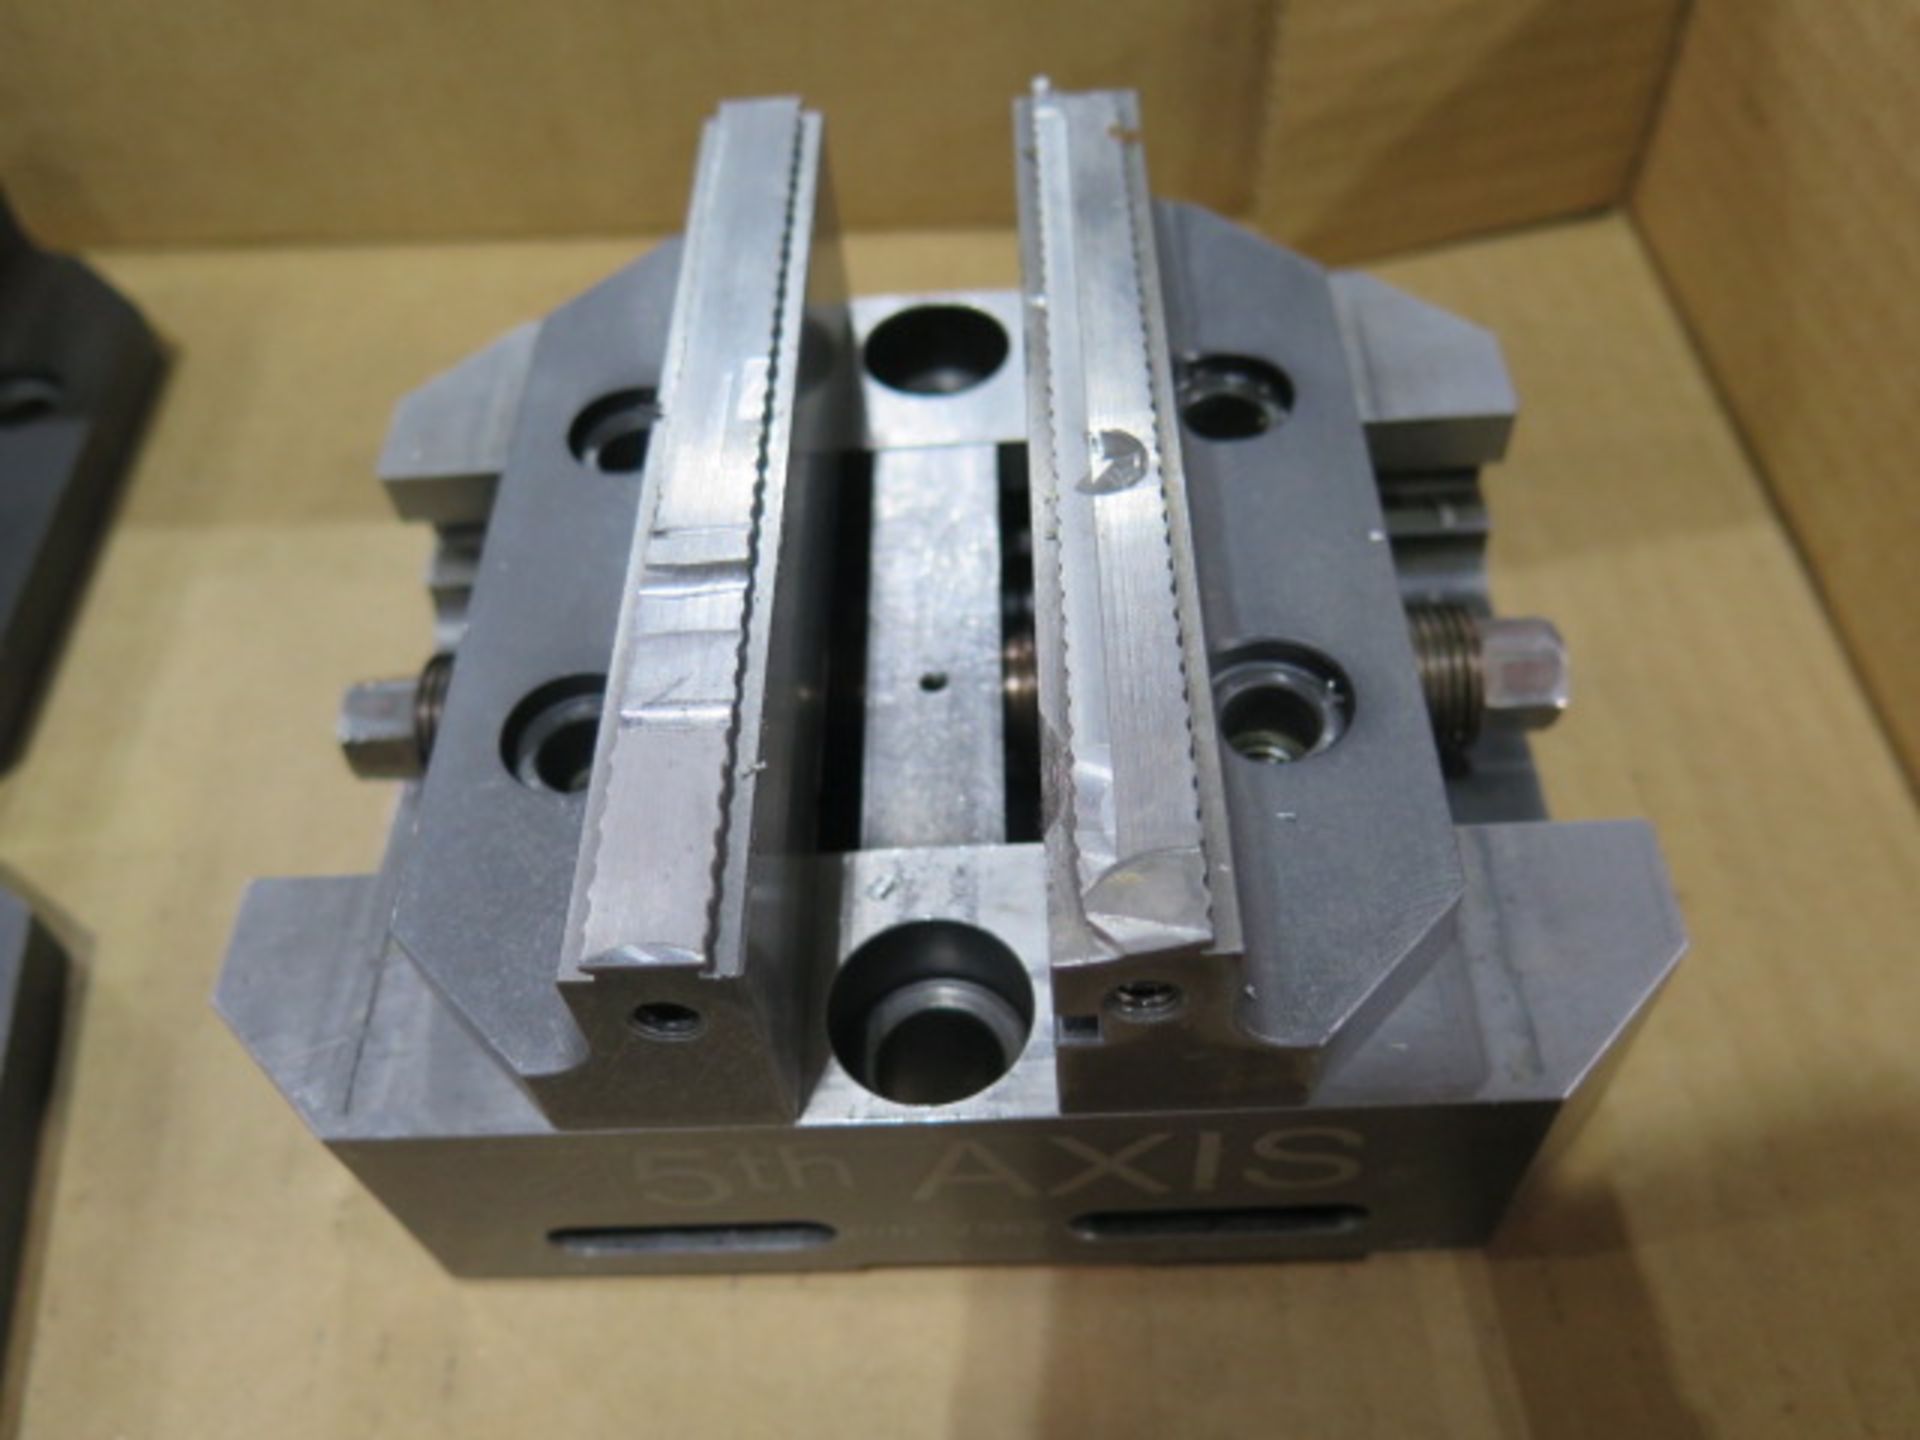 5th Axis V562 Vise (SOLD AS-IS - NO WARRANTY) - Image 3 of 6